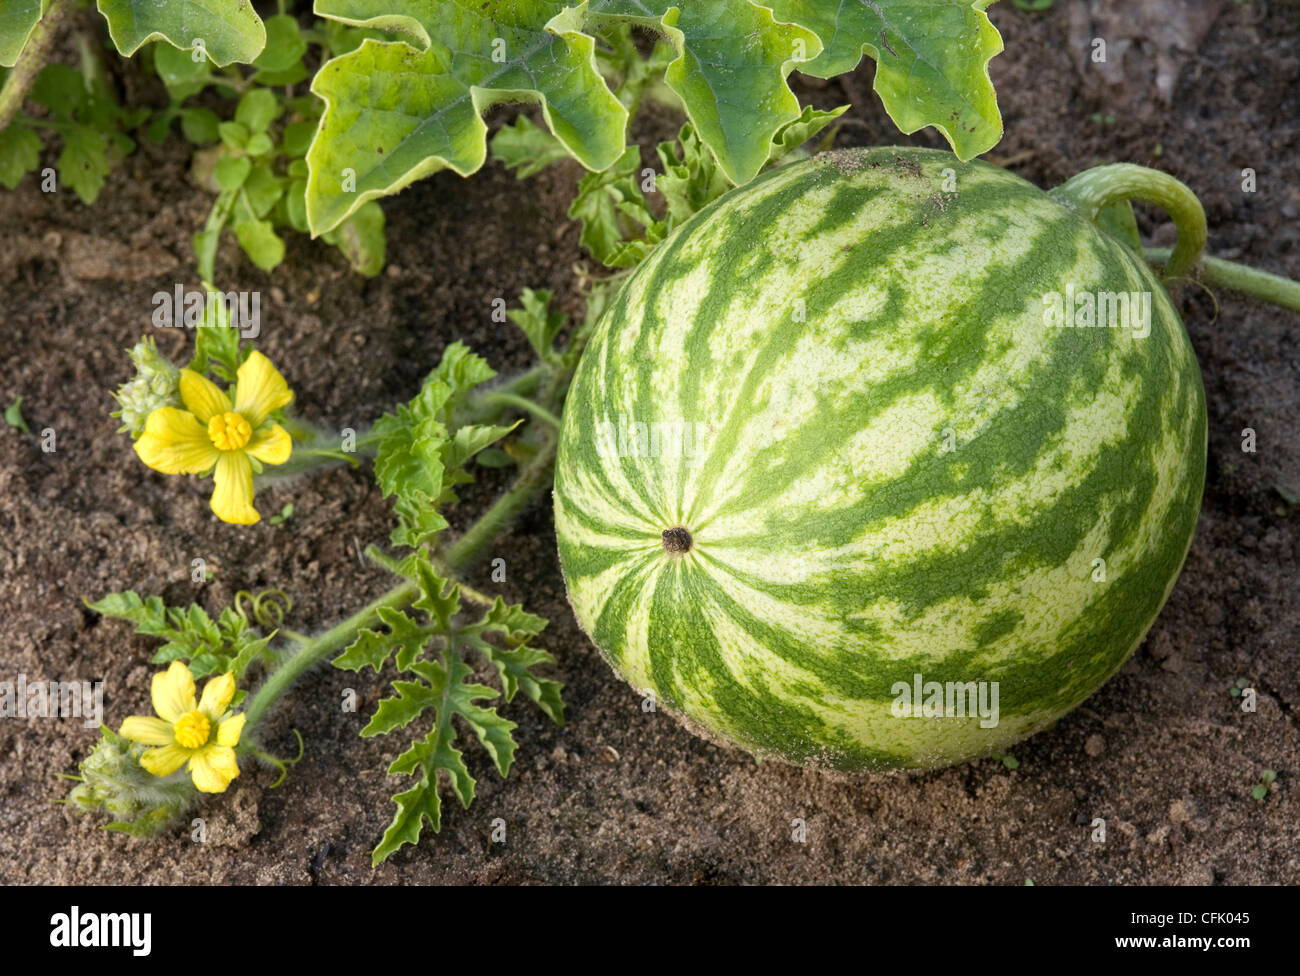 watermelon growing in the field, with leaves and flowers. Stock Photo